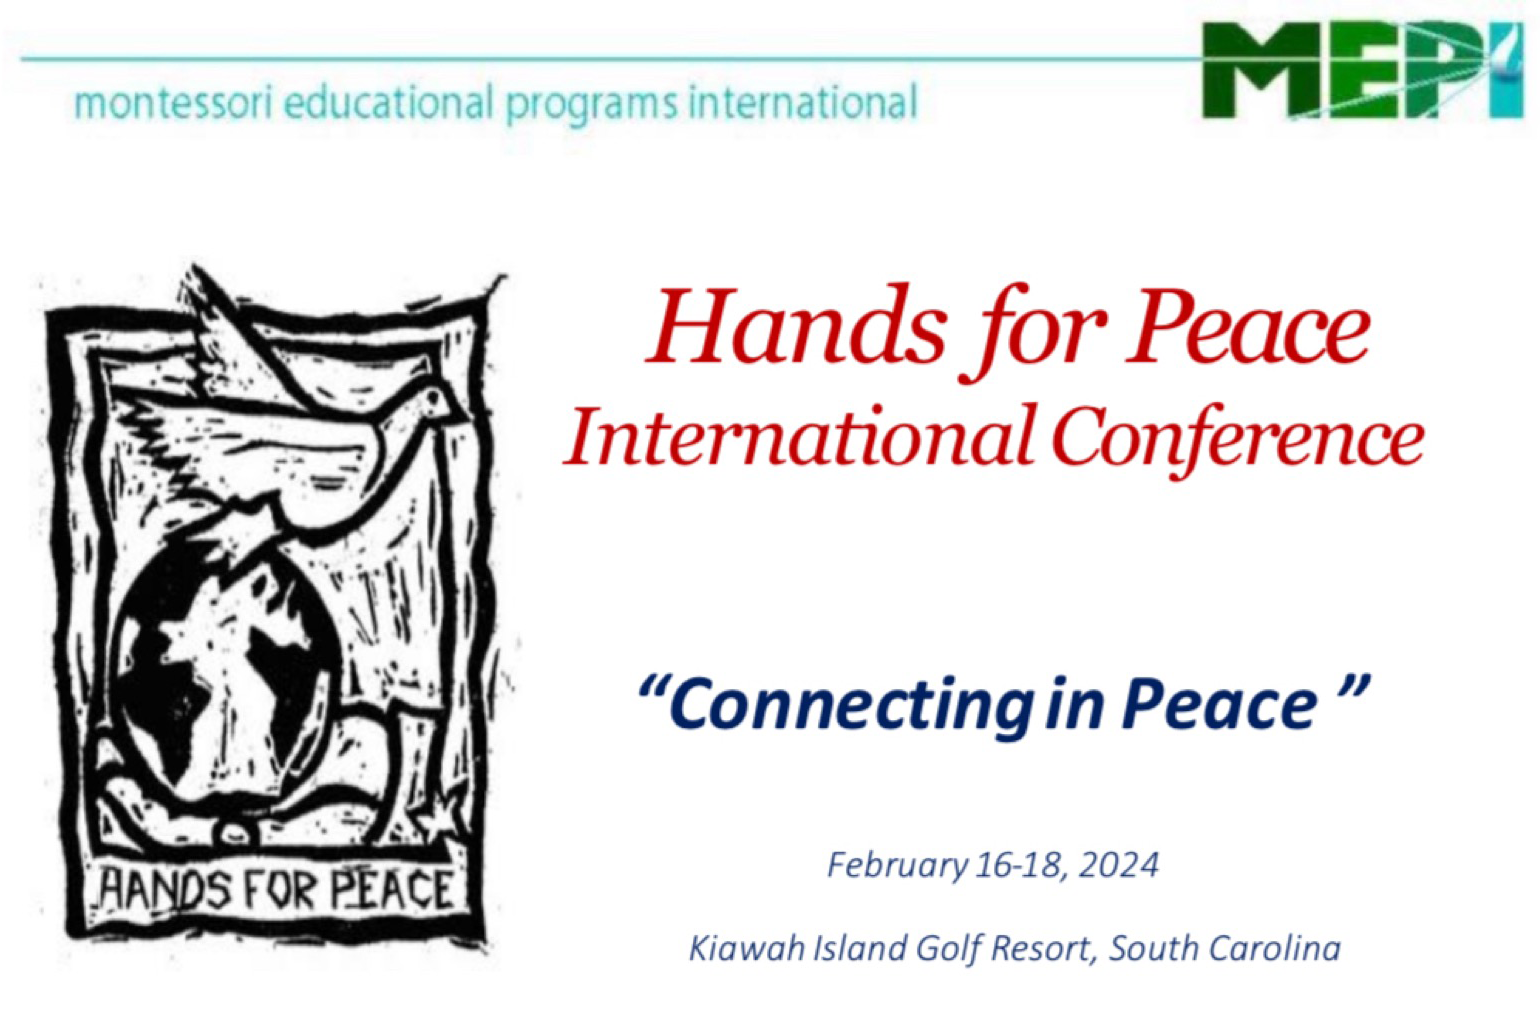 Hands for Peace International Conference